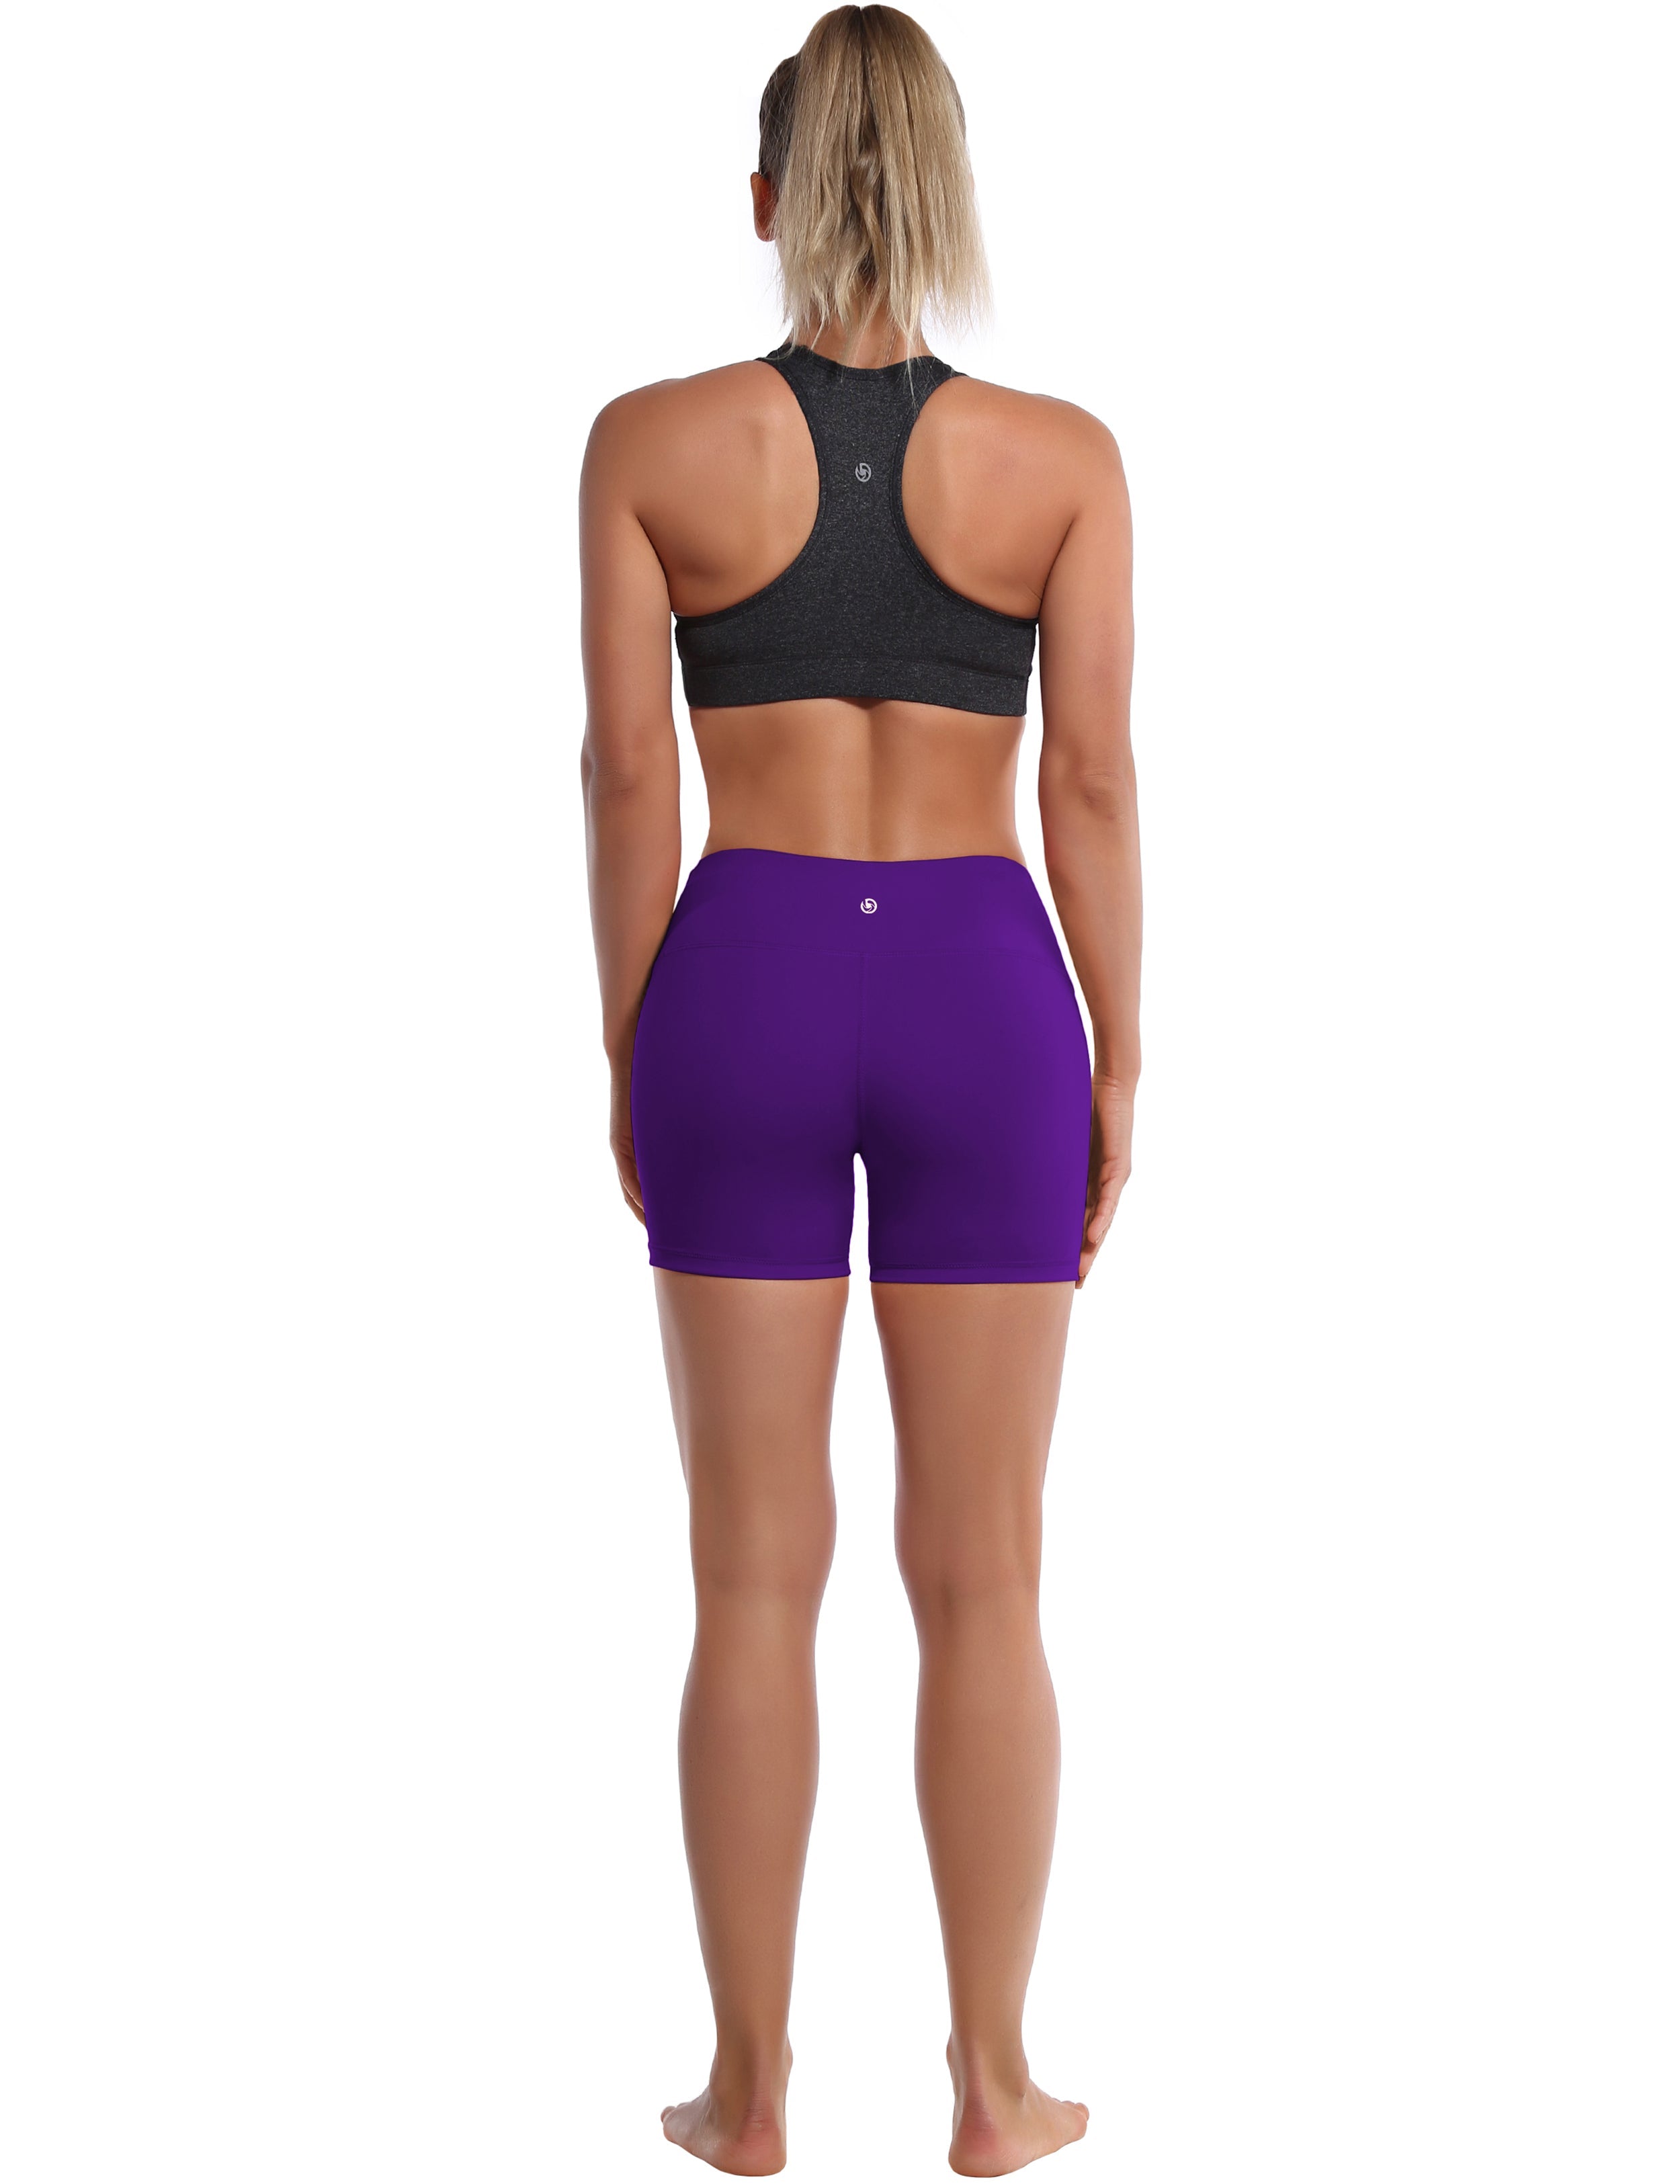 4" Jogging Shorts eggplantpurple Sleek, soft, smooth and totally comfortable: our newest style is here. Softest-ever fabric High elasticity High density 4-way stretch Fabric doesn't attract lint easily No see-through Moisture-wicking Machine wash 75% Nylon, 25% Spandex